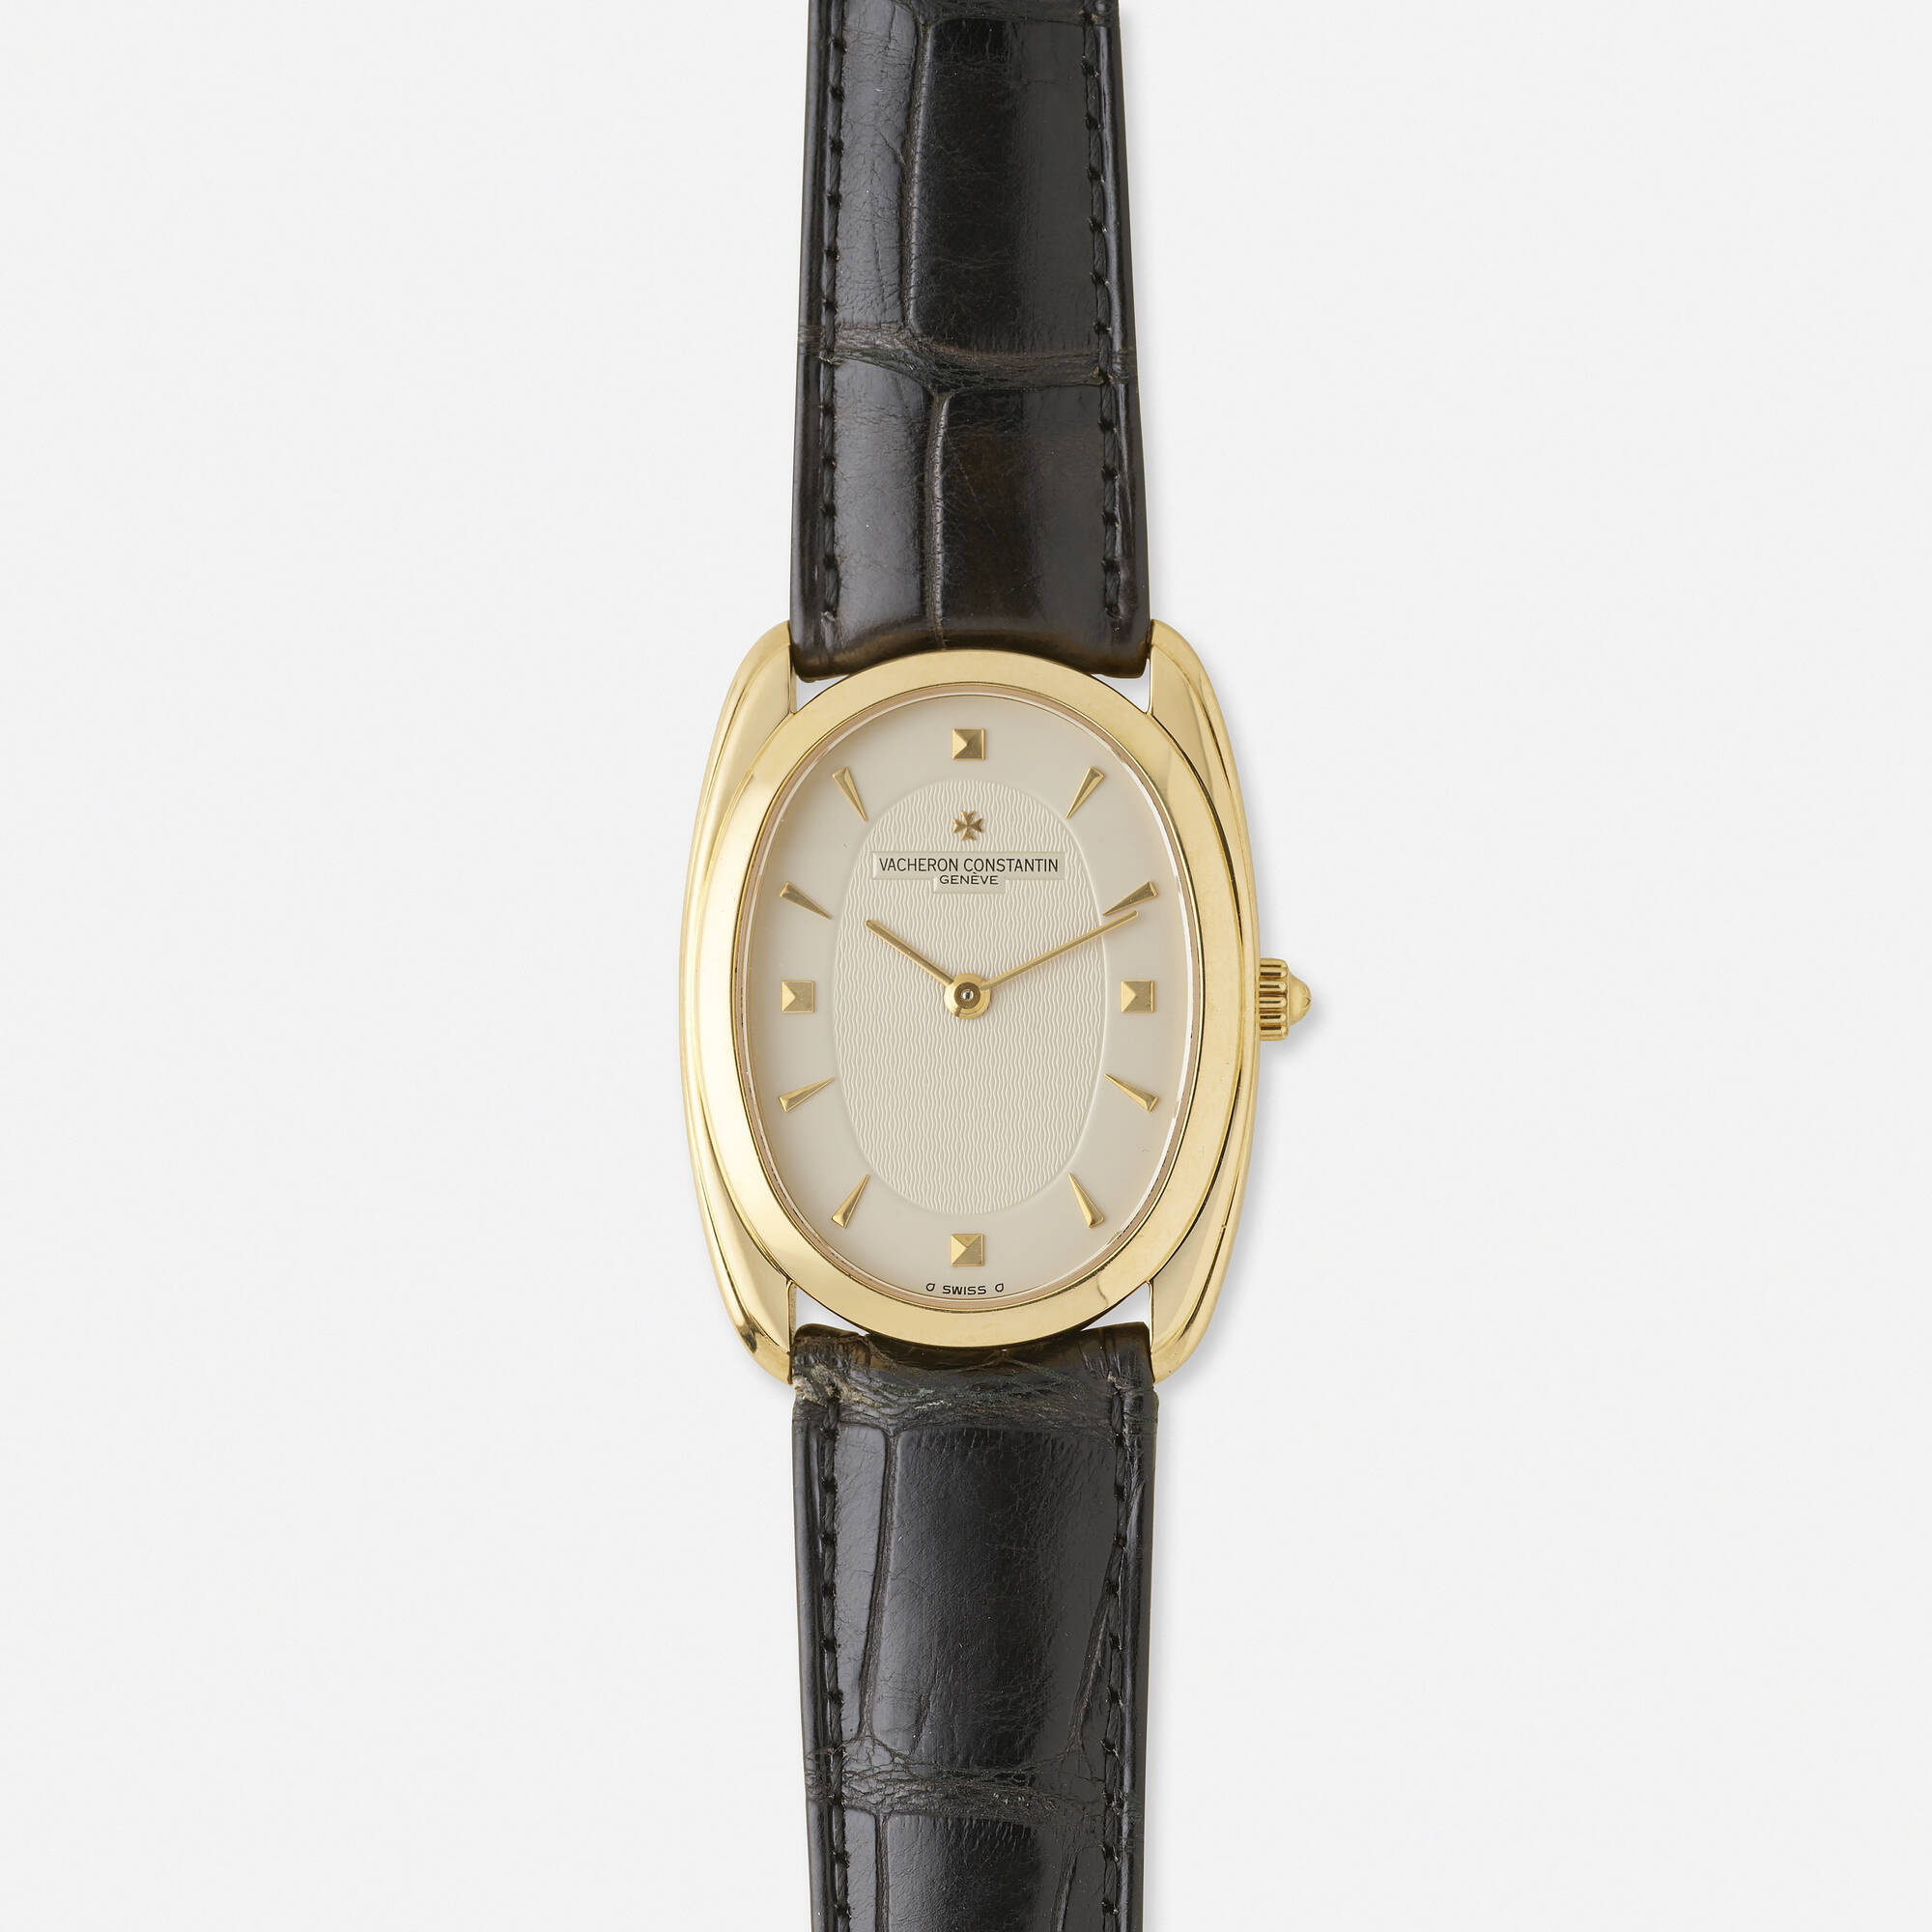 459: VACHERON gold \'Les 2021 Ref. Watches: | < 31110/000J Rago CONSTANTIN, Store < Auctions September 30 A Prominent and leather wristwatch, Collection, Historiques\' Auctions